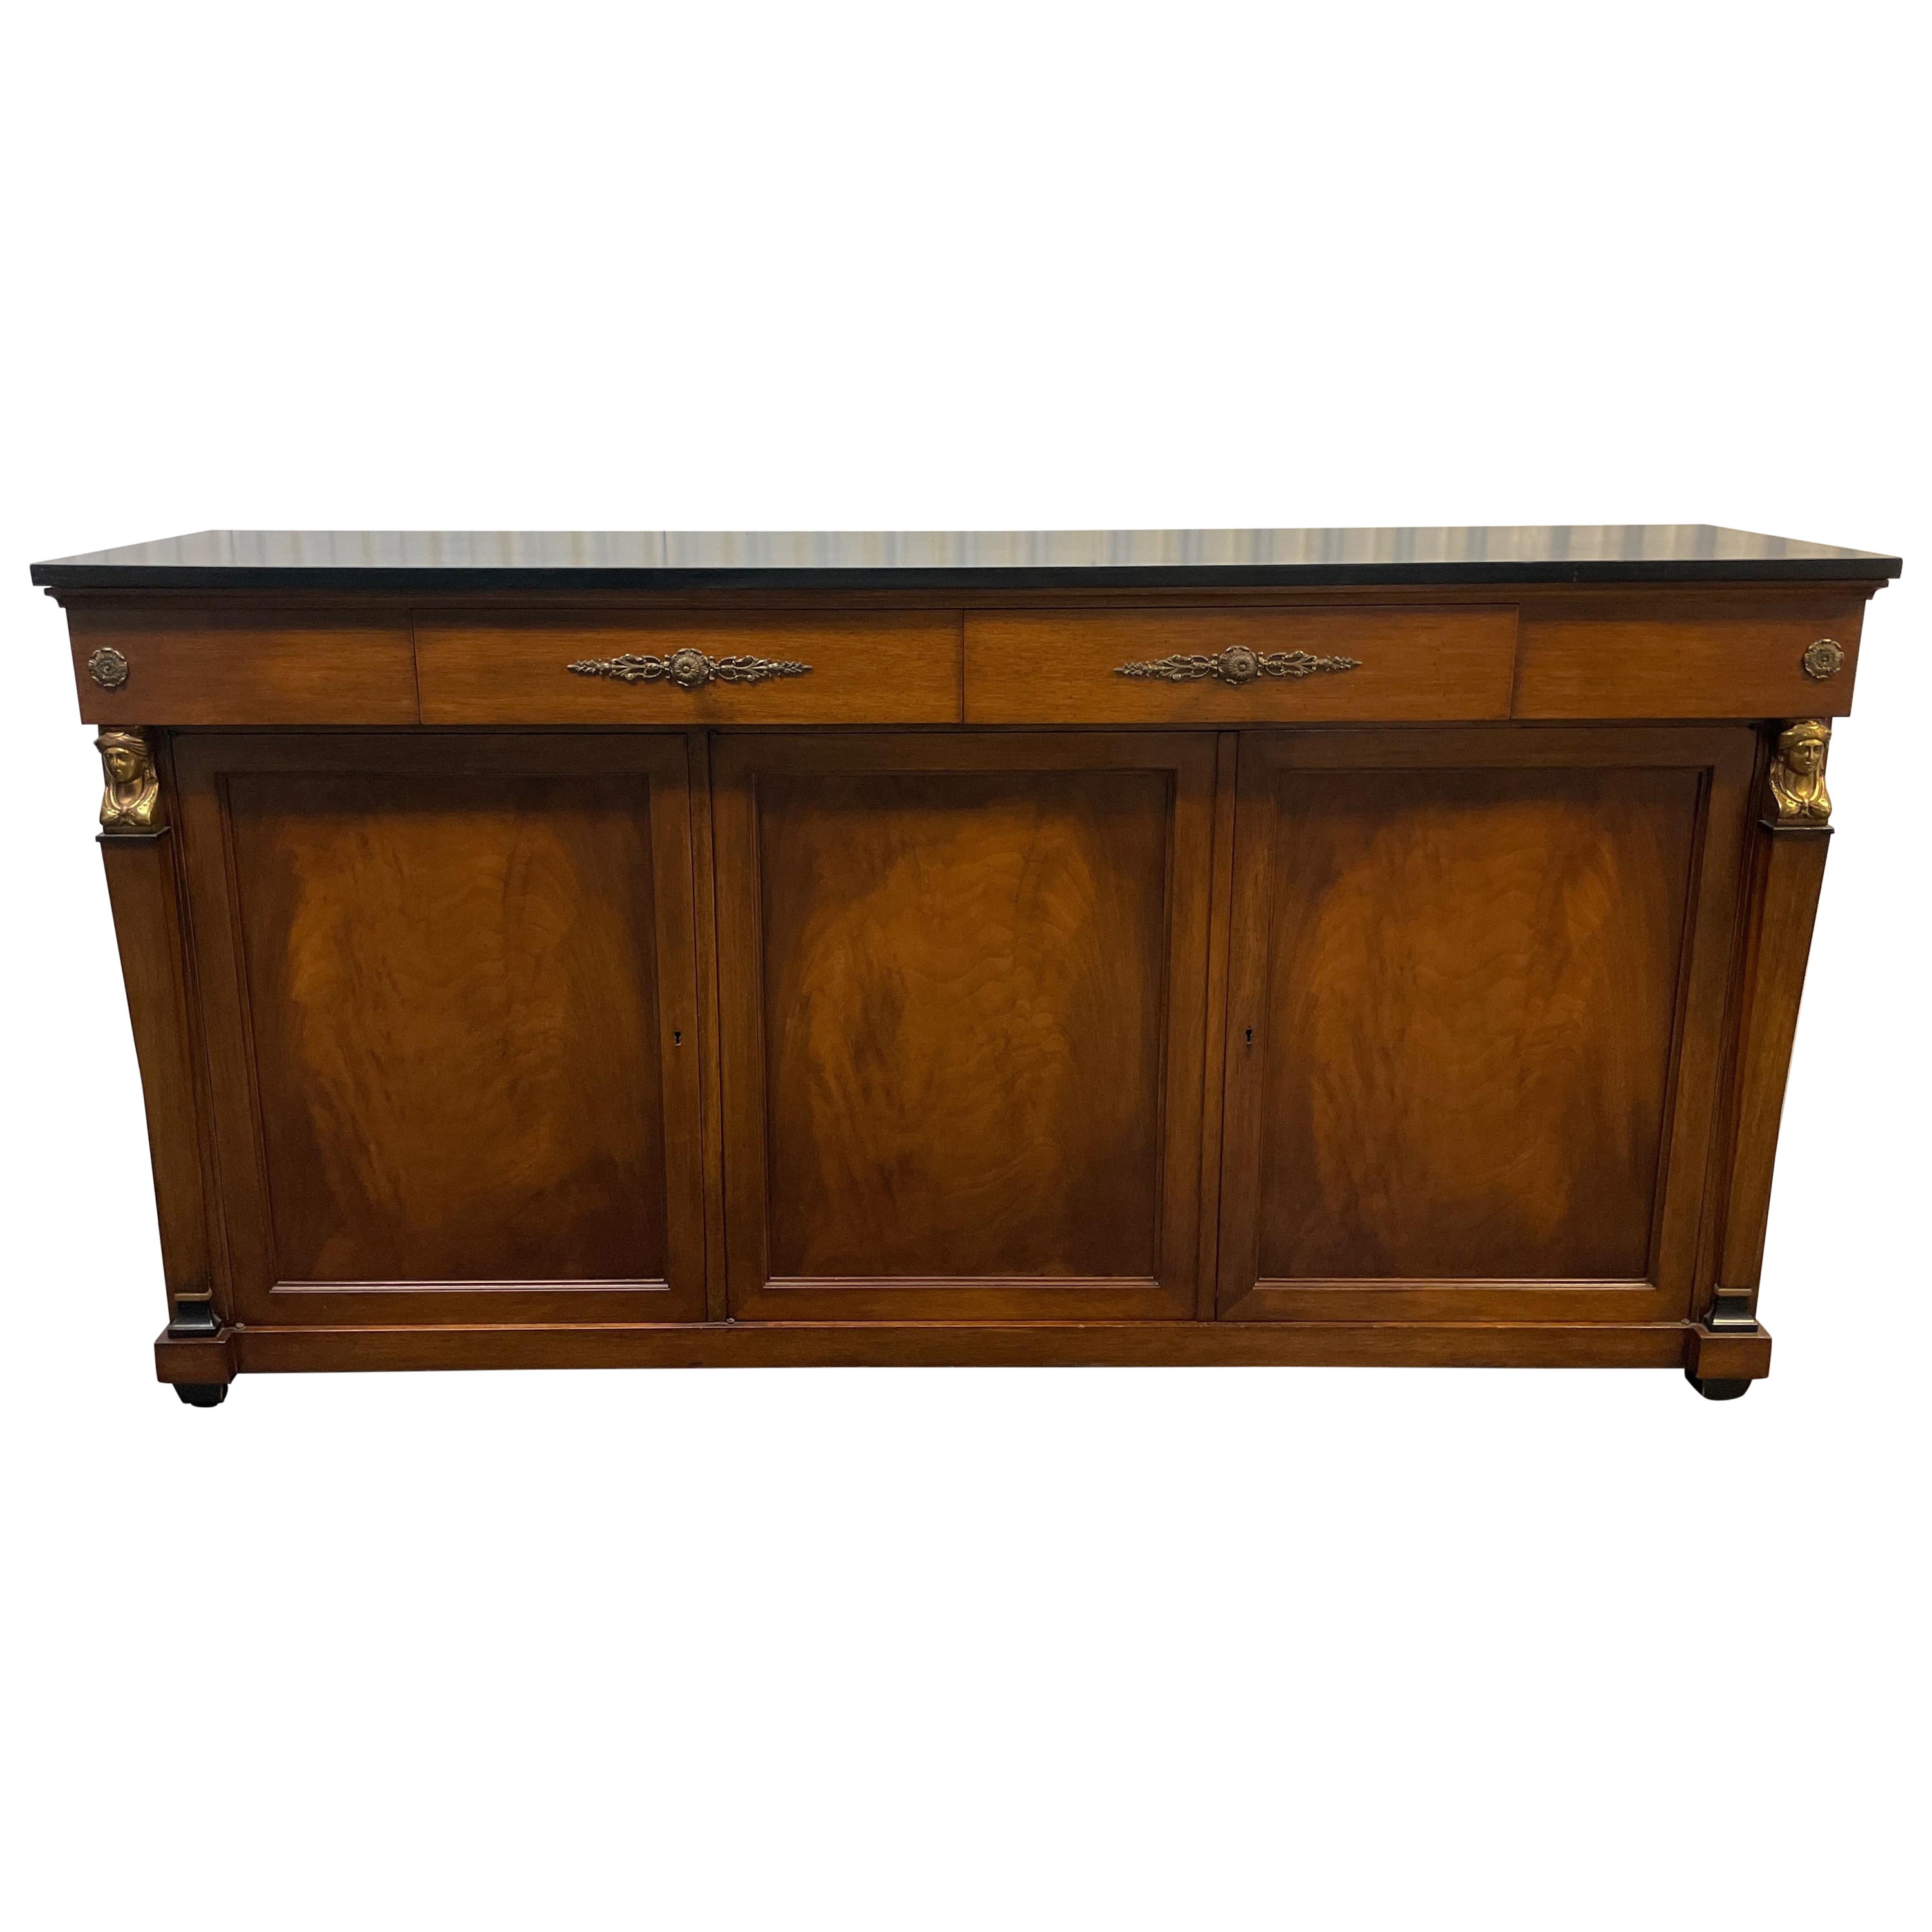 Vintage Neoclassical Style Credenza / Buffet